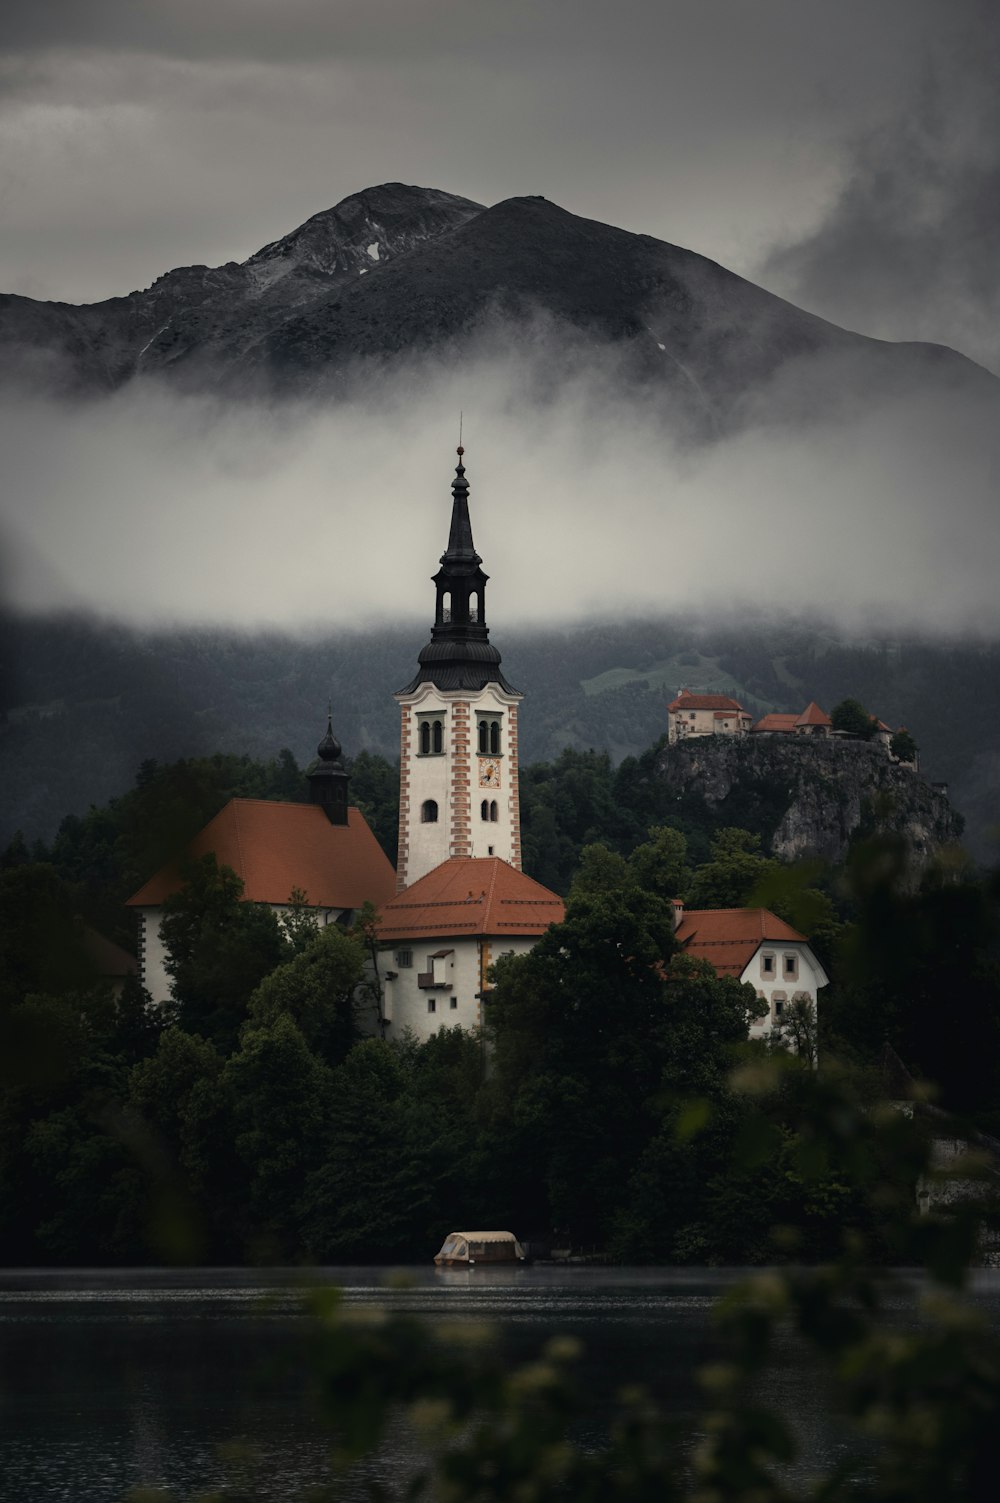 a building with a tower and a mountain in the background